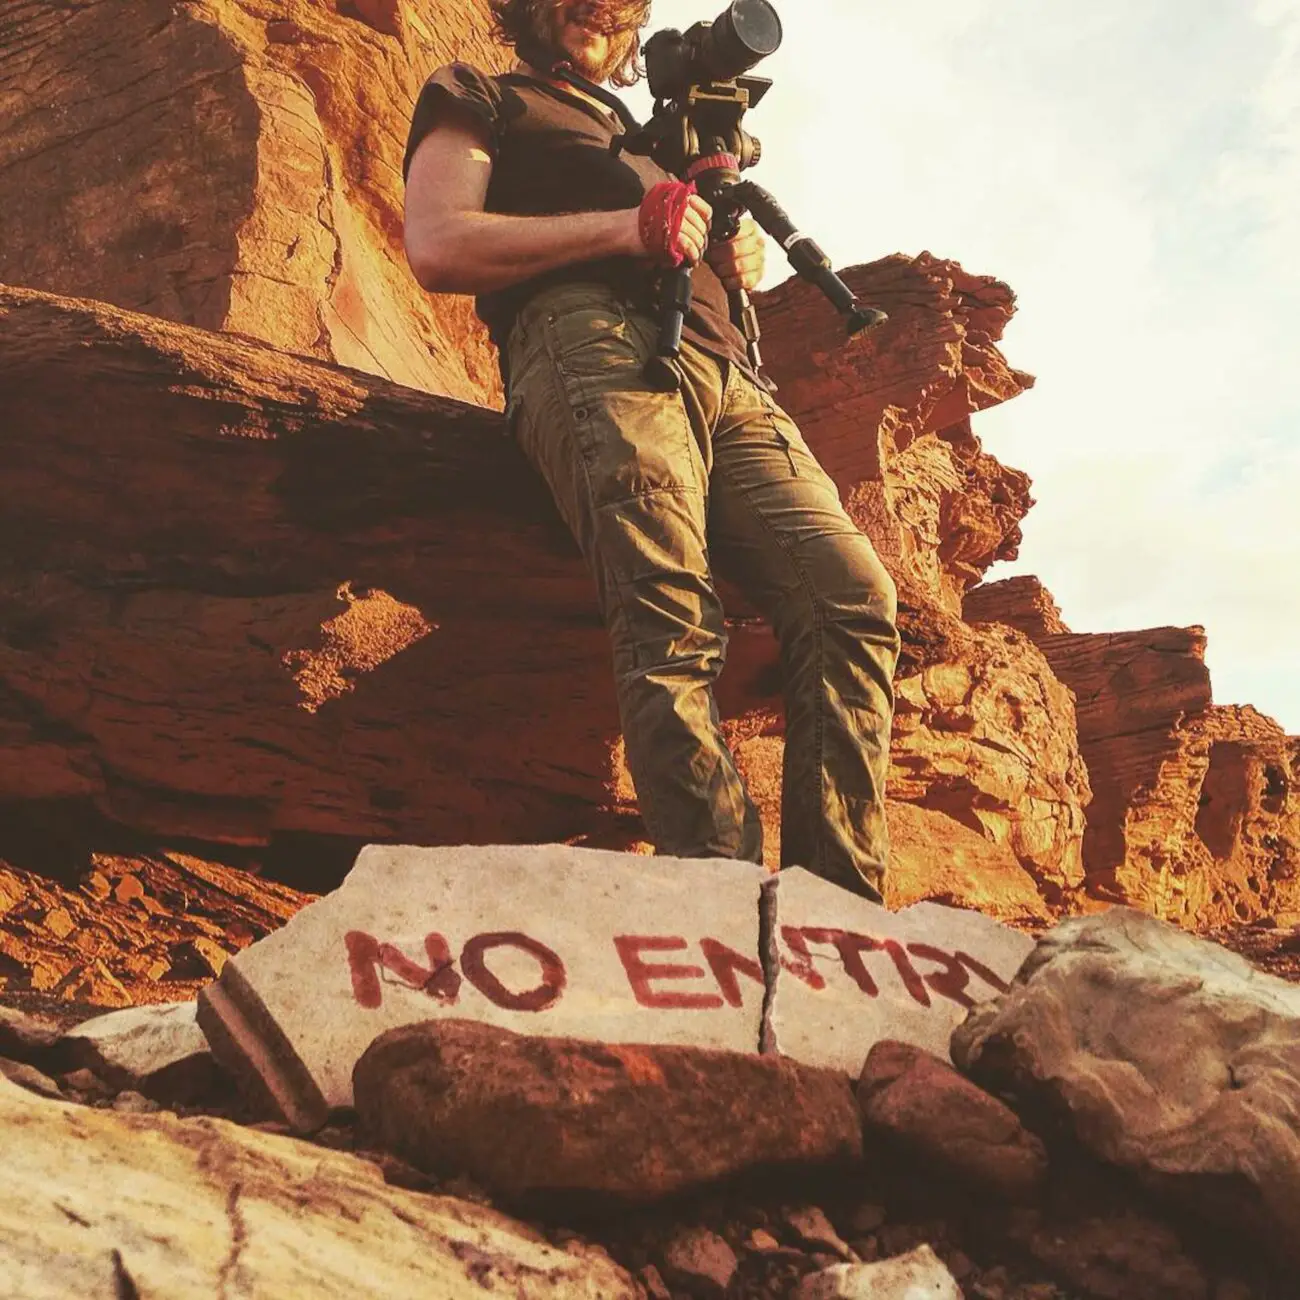 Jacob Gentry (writer, director and cinematographer) on the set of Night Sky in Arizona